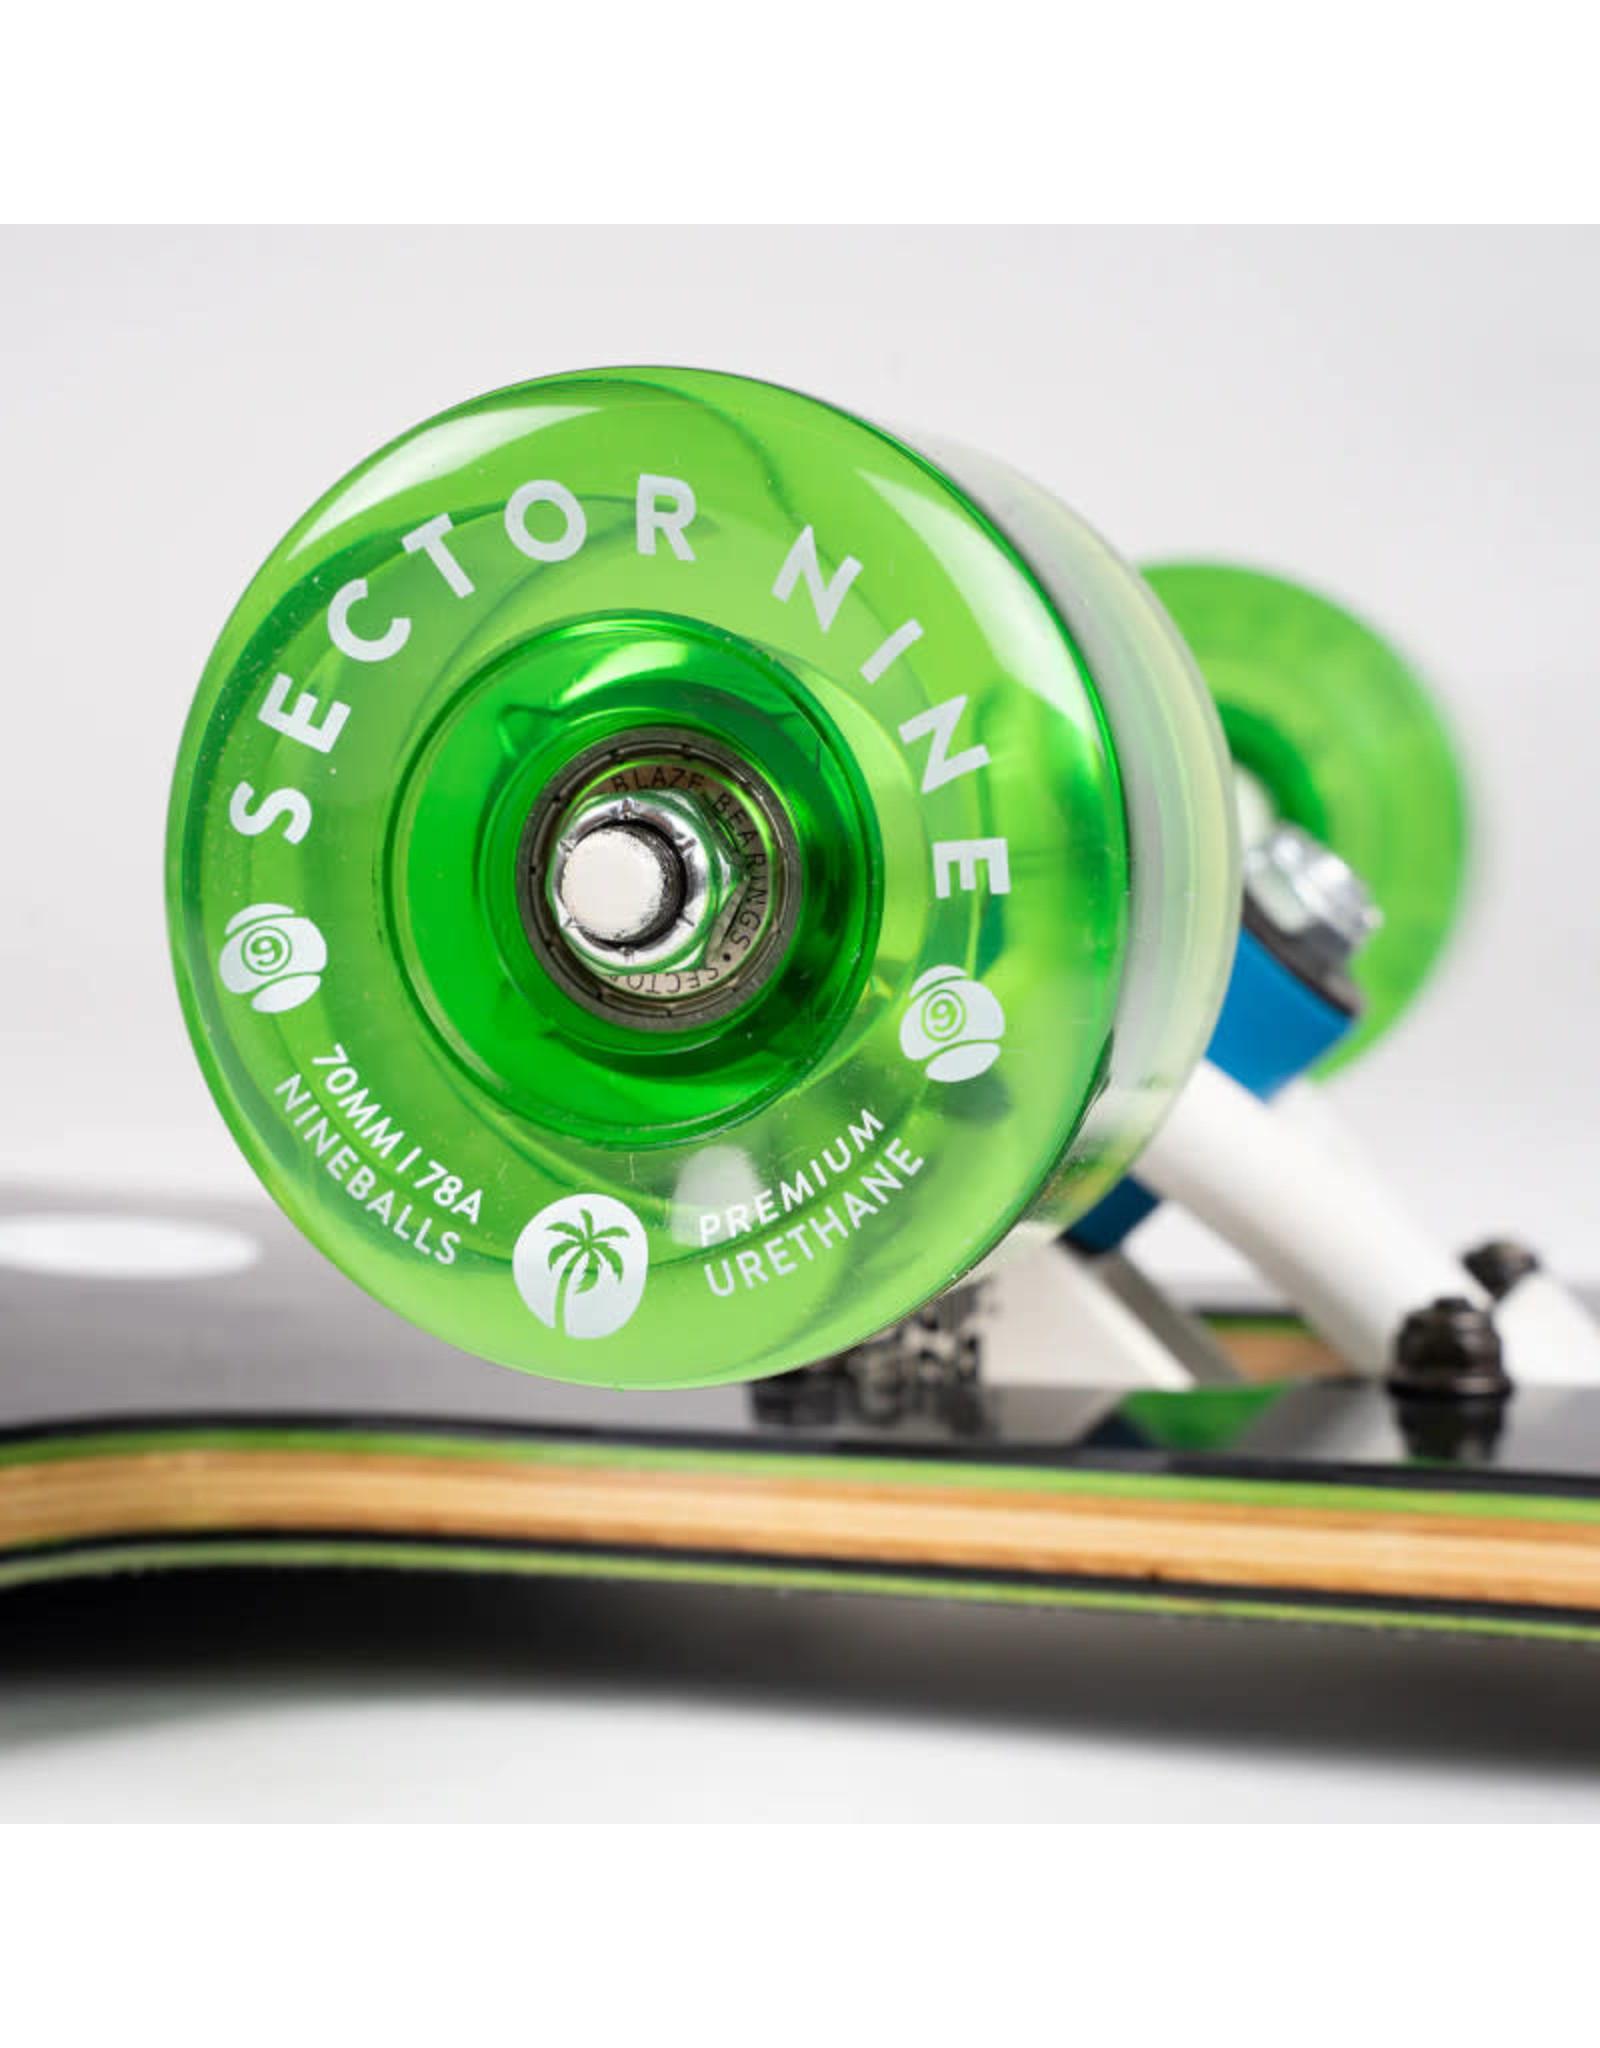 Sector 9 Skateboards Sector 9 41" Mosaic Dropper Complete